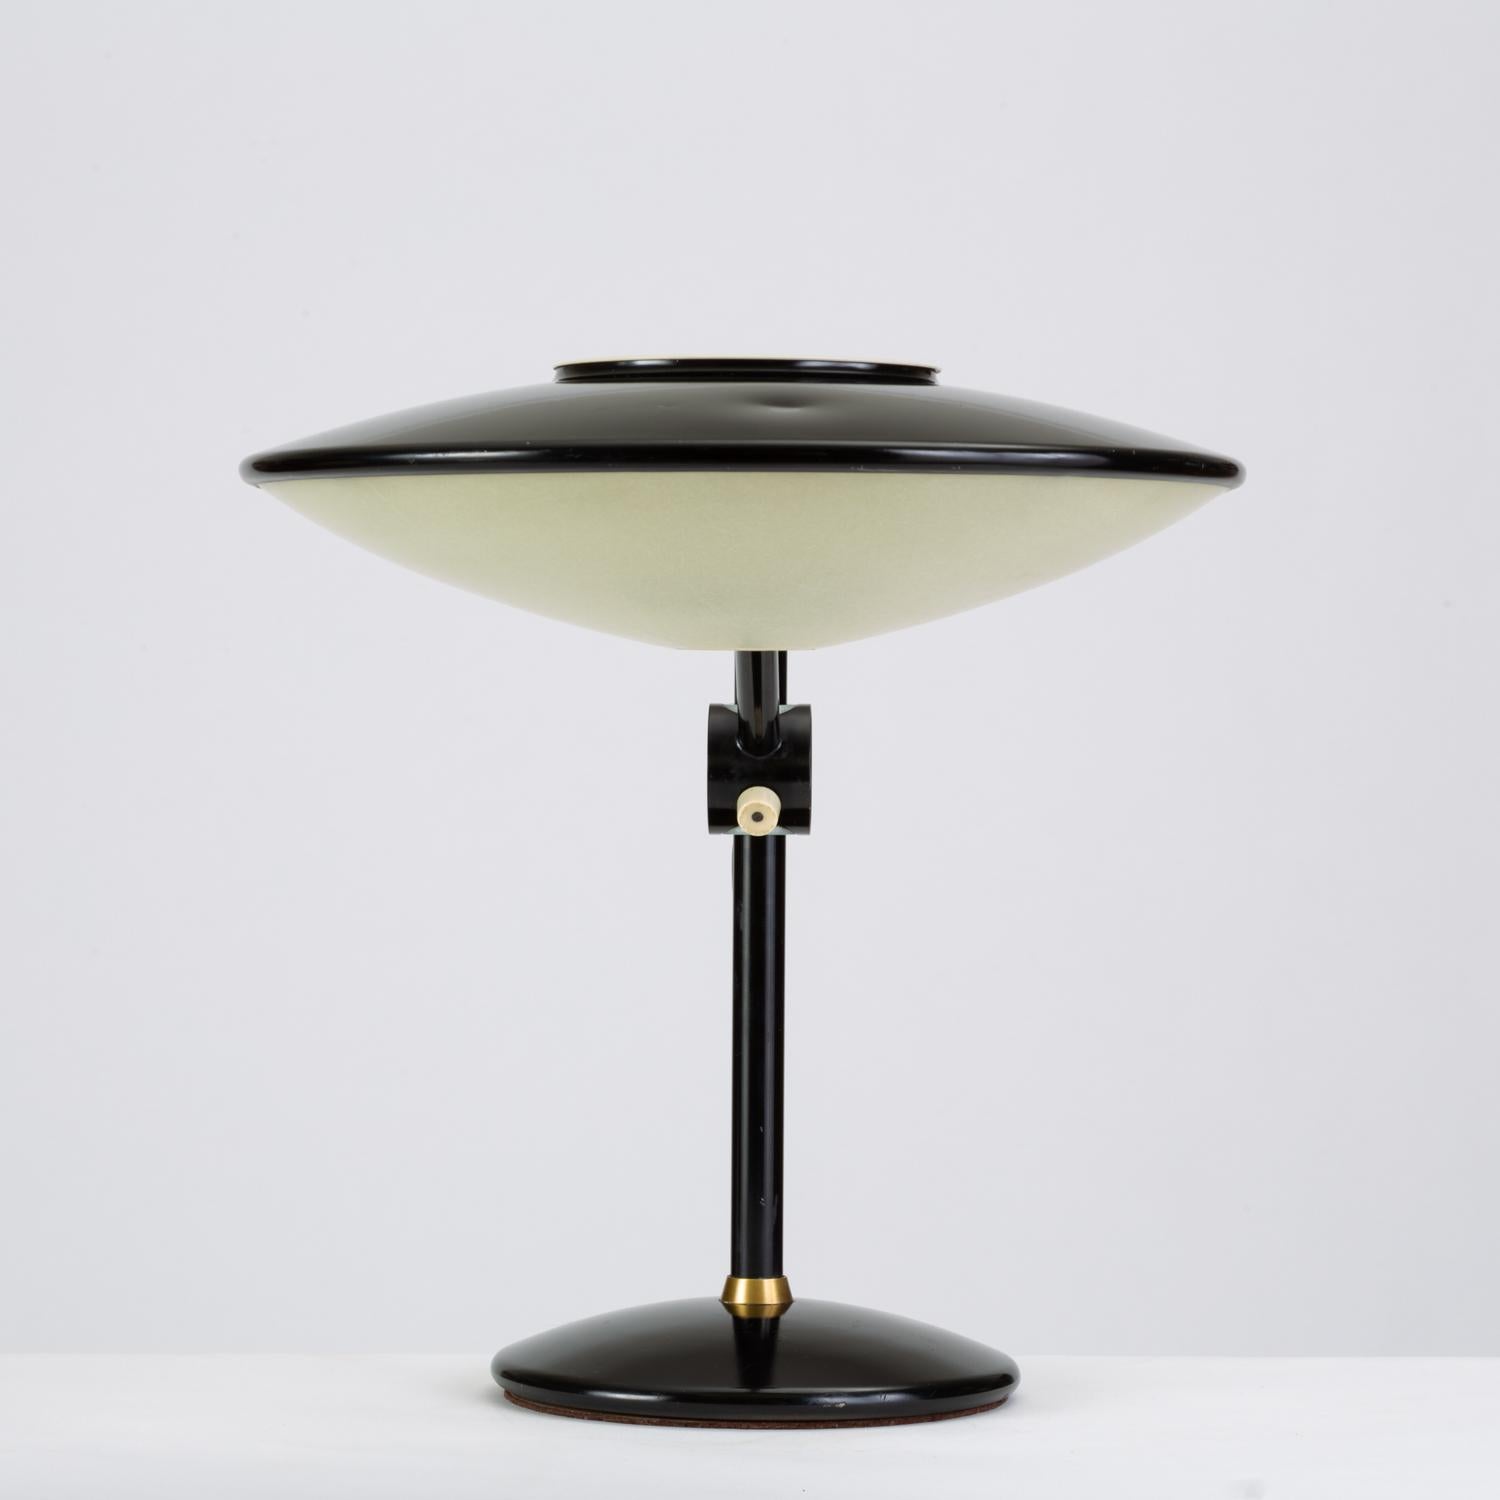 Mid-Century Modern Black-Enameled Desk Lamp with Brass Accents by Dazor